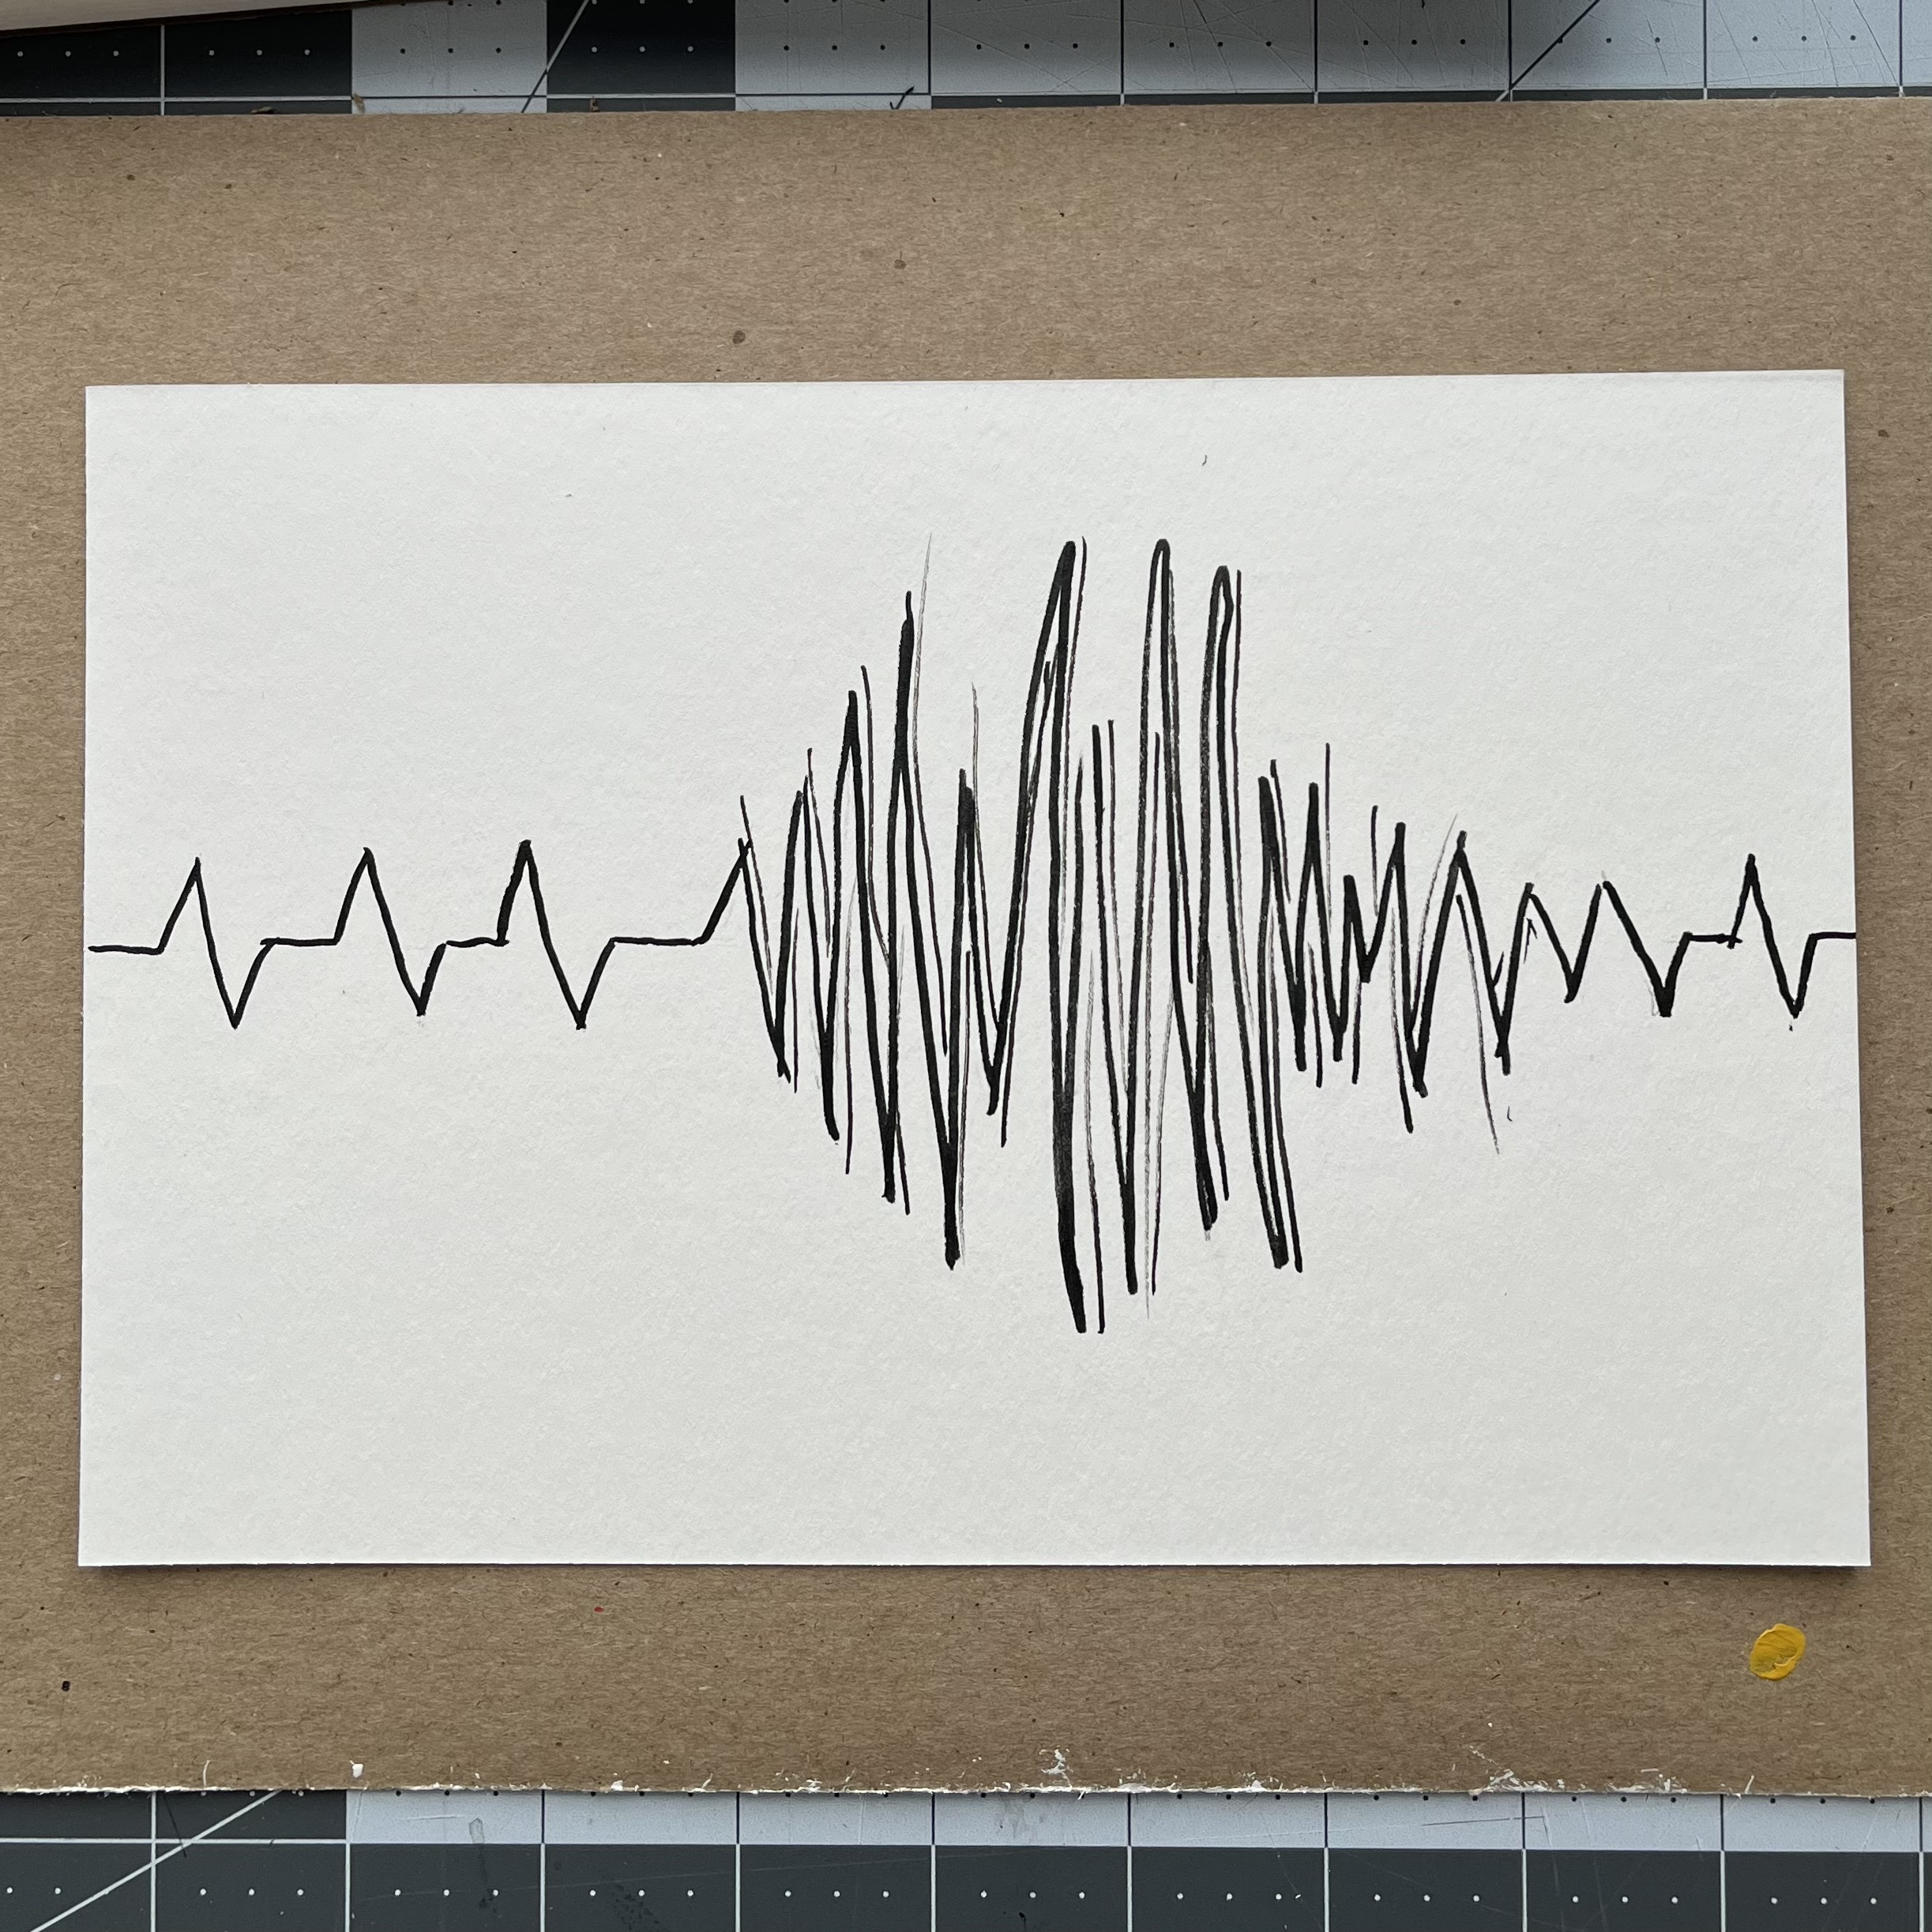 An ink drawing showing a heart rate monitor line with a sudden burst of rapid activity then settling down.